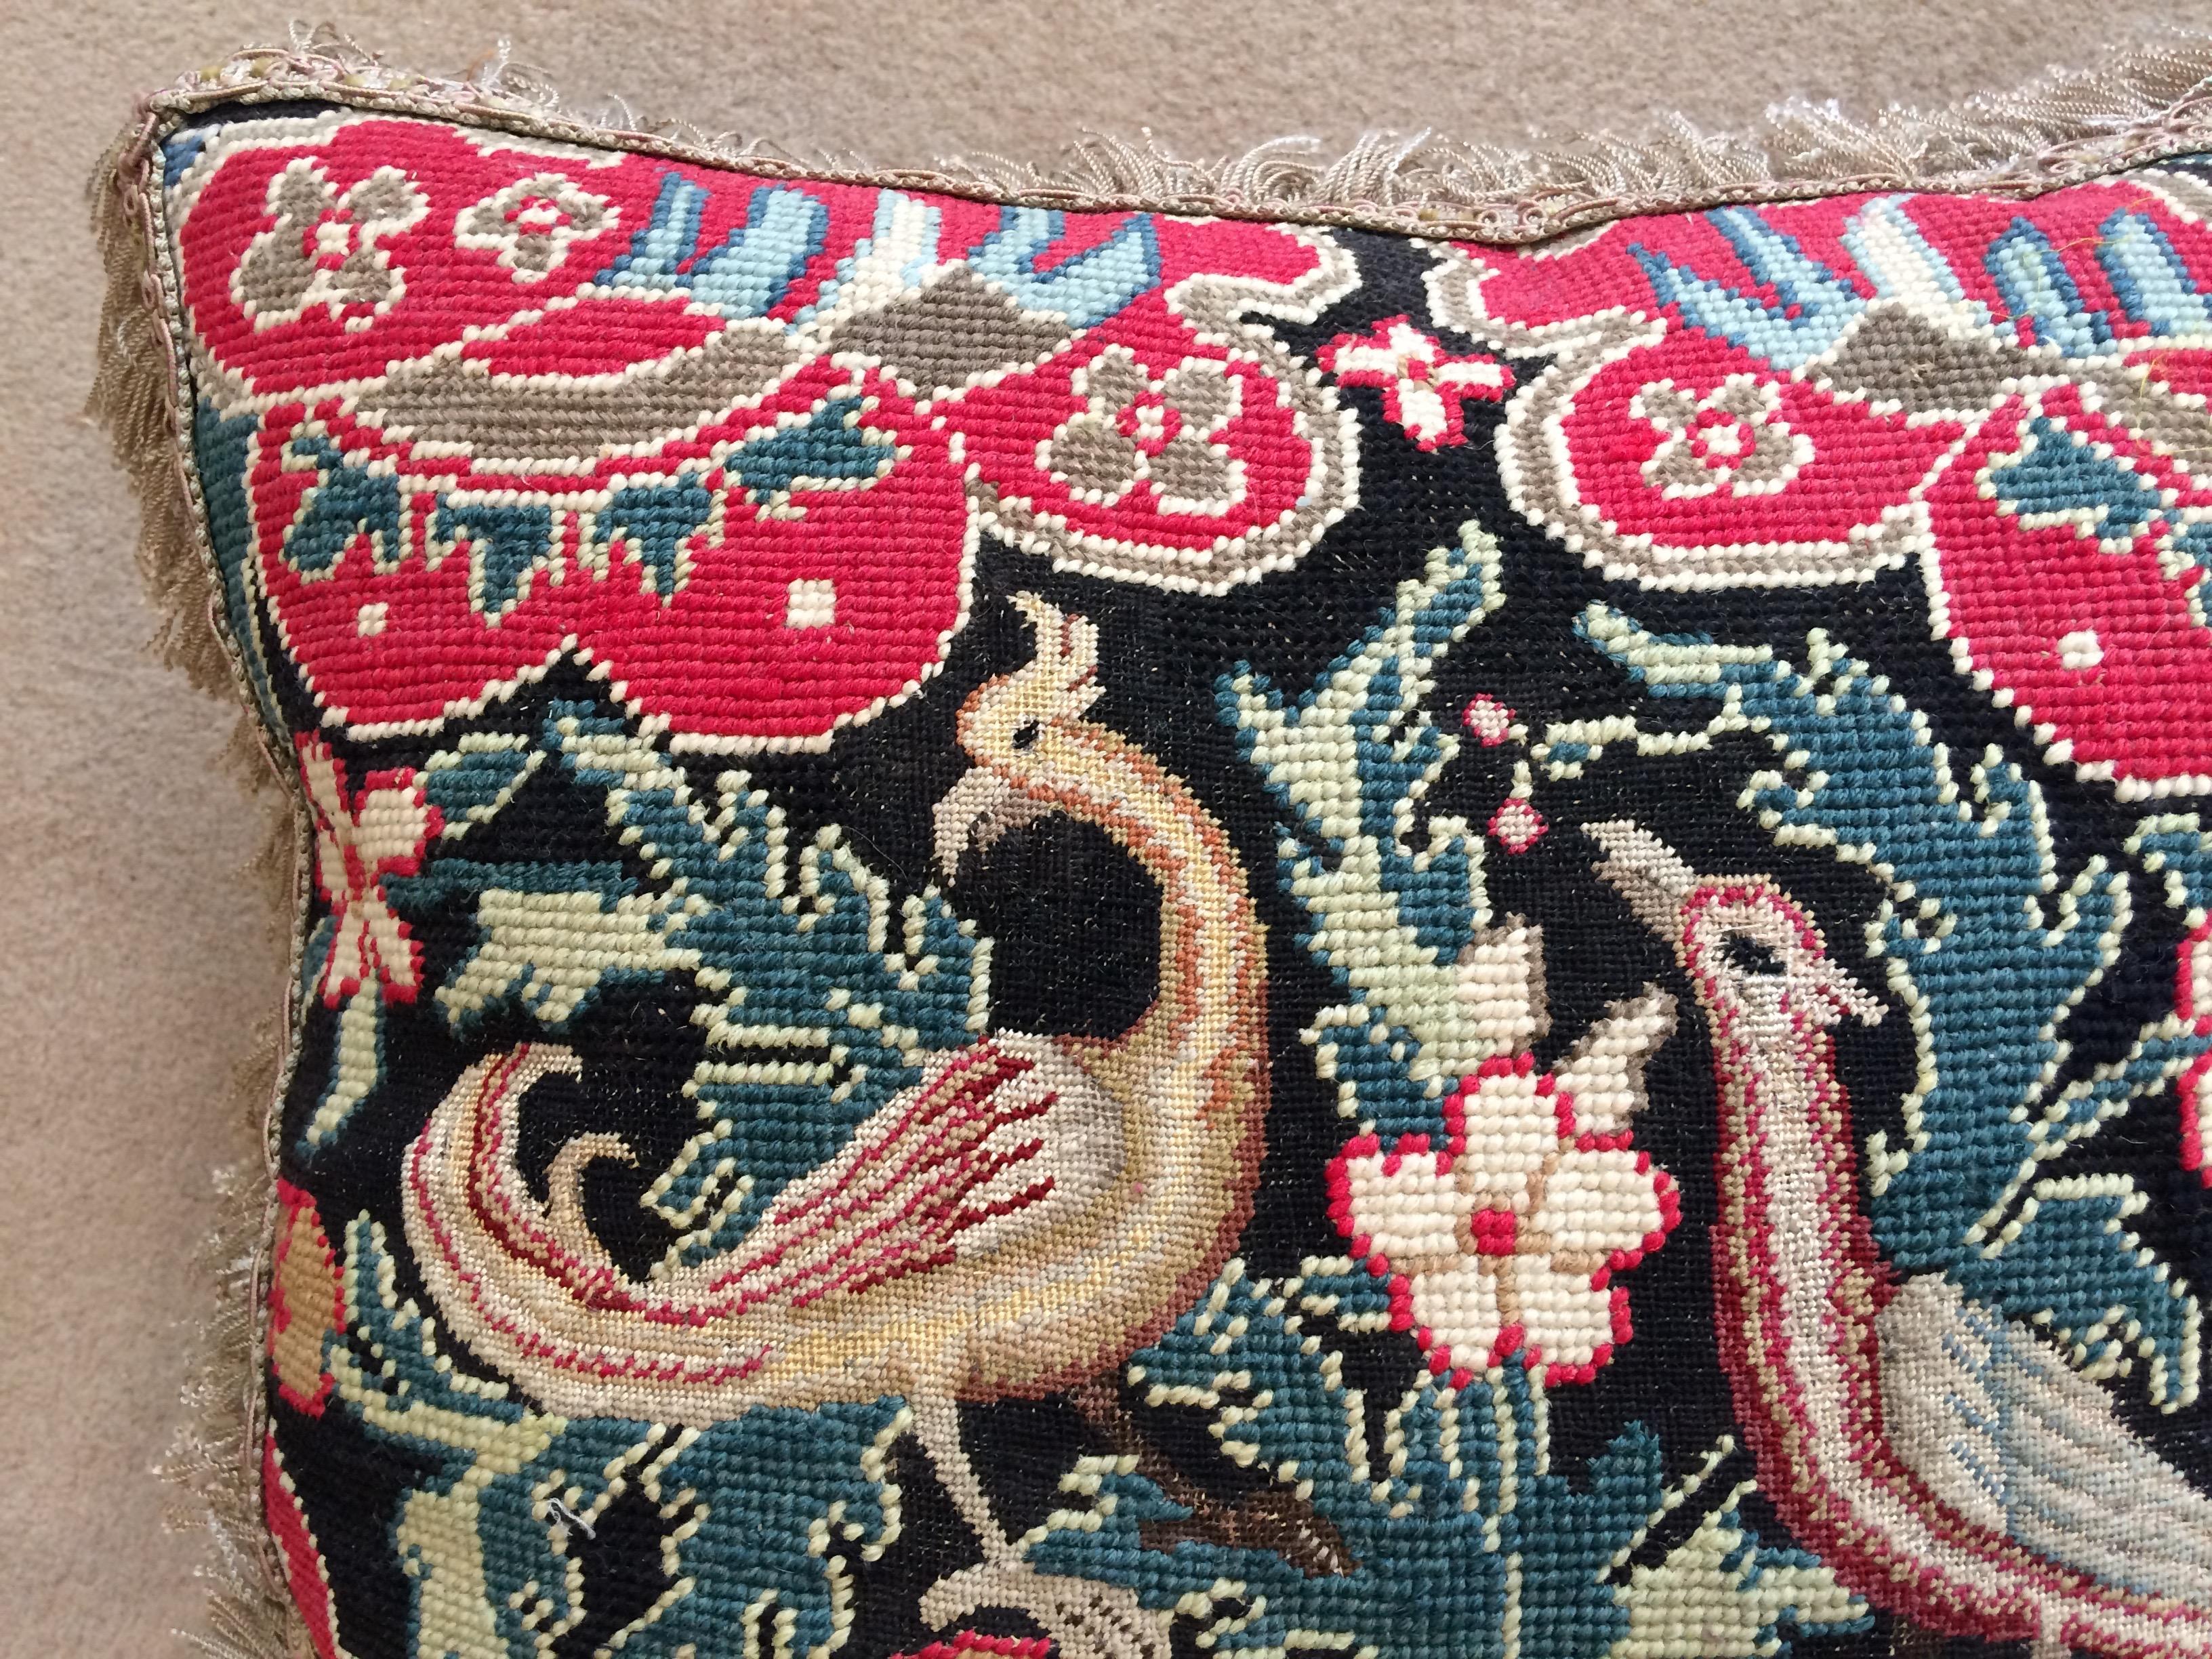 A cushion of mid-18th century French needlework with a black ground with exceptionally fresh colors.